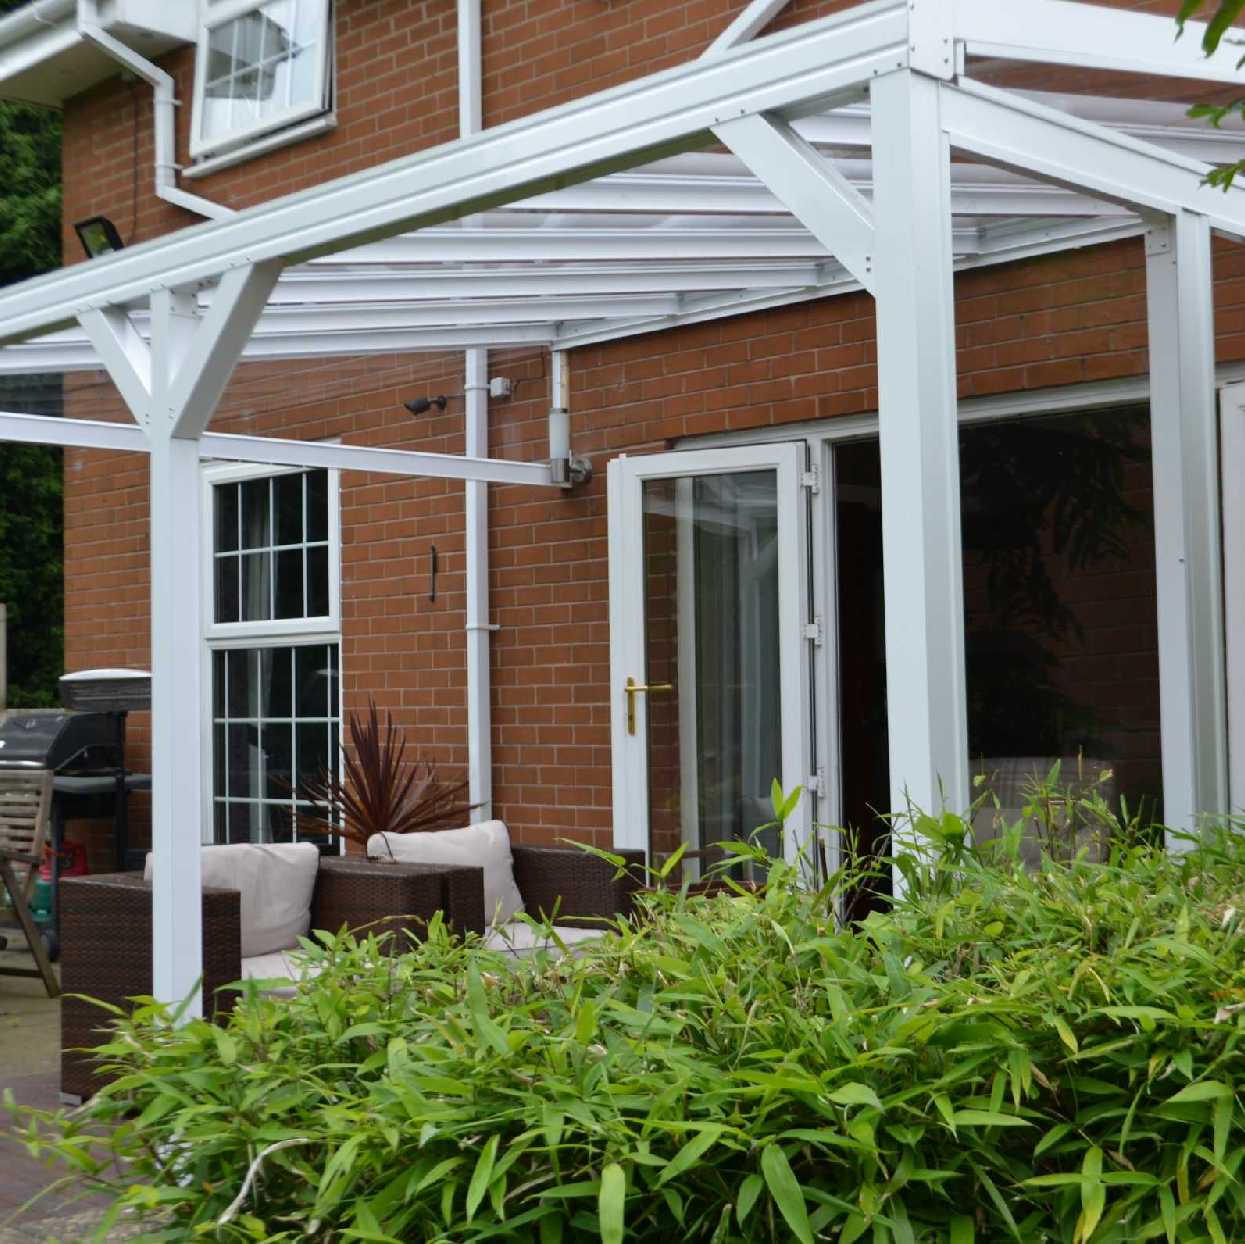 Omega Smart Lean-To Canopy, White with 6mm Glass Clear Plate Polycarbonate Glazing - 6.3m (W) x 1.5m (P), (4) Supporting Posts from Omega Build